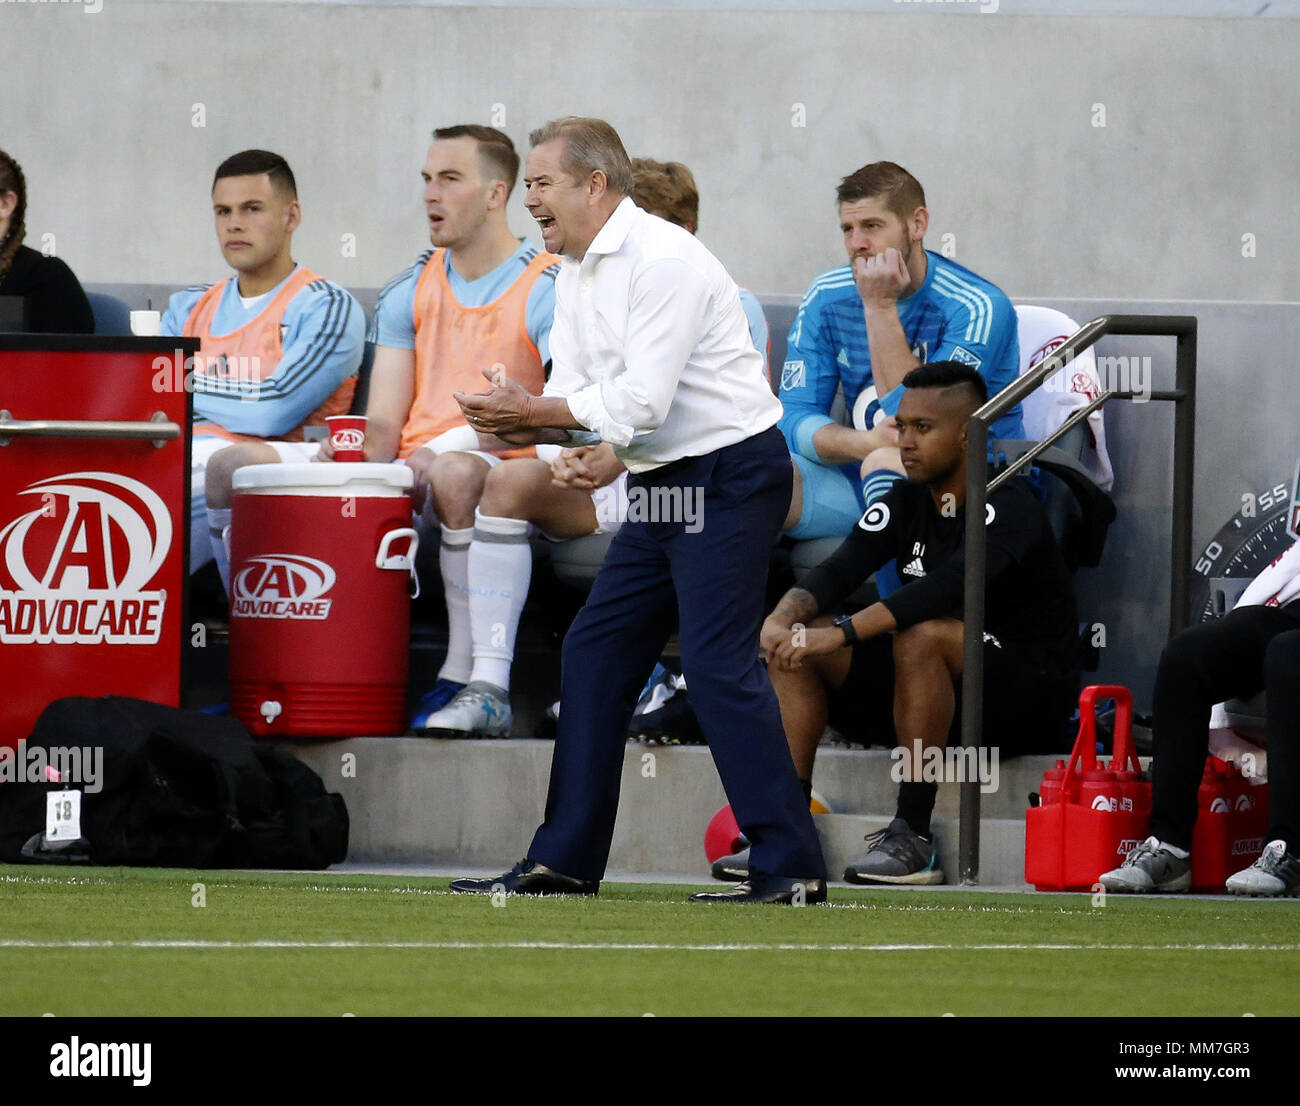 Los Angeles, California, USA. 9th May, 2018. Minnesota United head coach Adrian Heath yells during an MLS soccer game between Los Angeles FC and Minnesota United at Banc of California Stadium in Los Angeles, Wednesday, May 9, 2018. The LAFC won 2-0. Credit: Ringo Chiu/ZUMA Wire/Alamy Live News Stock Photo